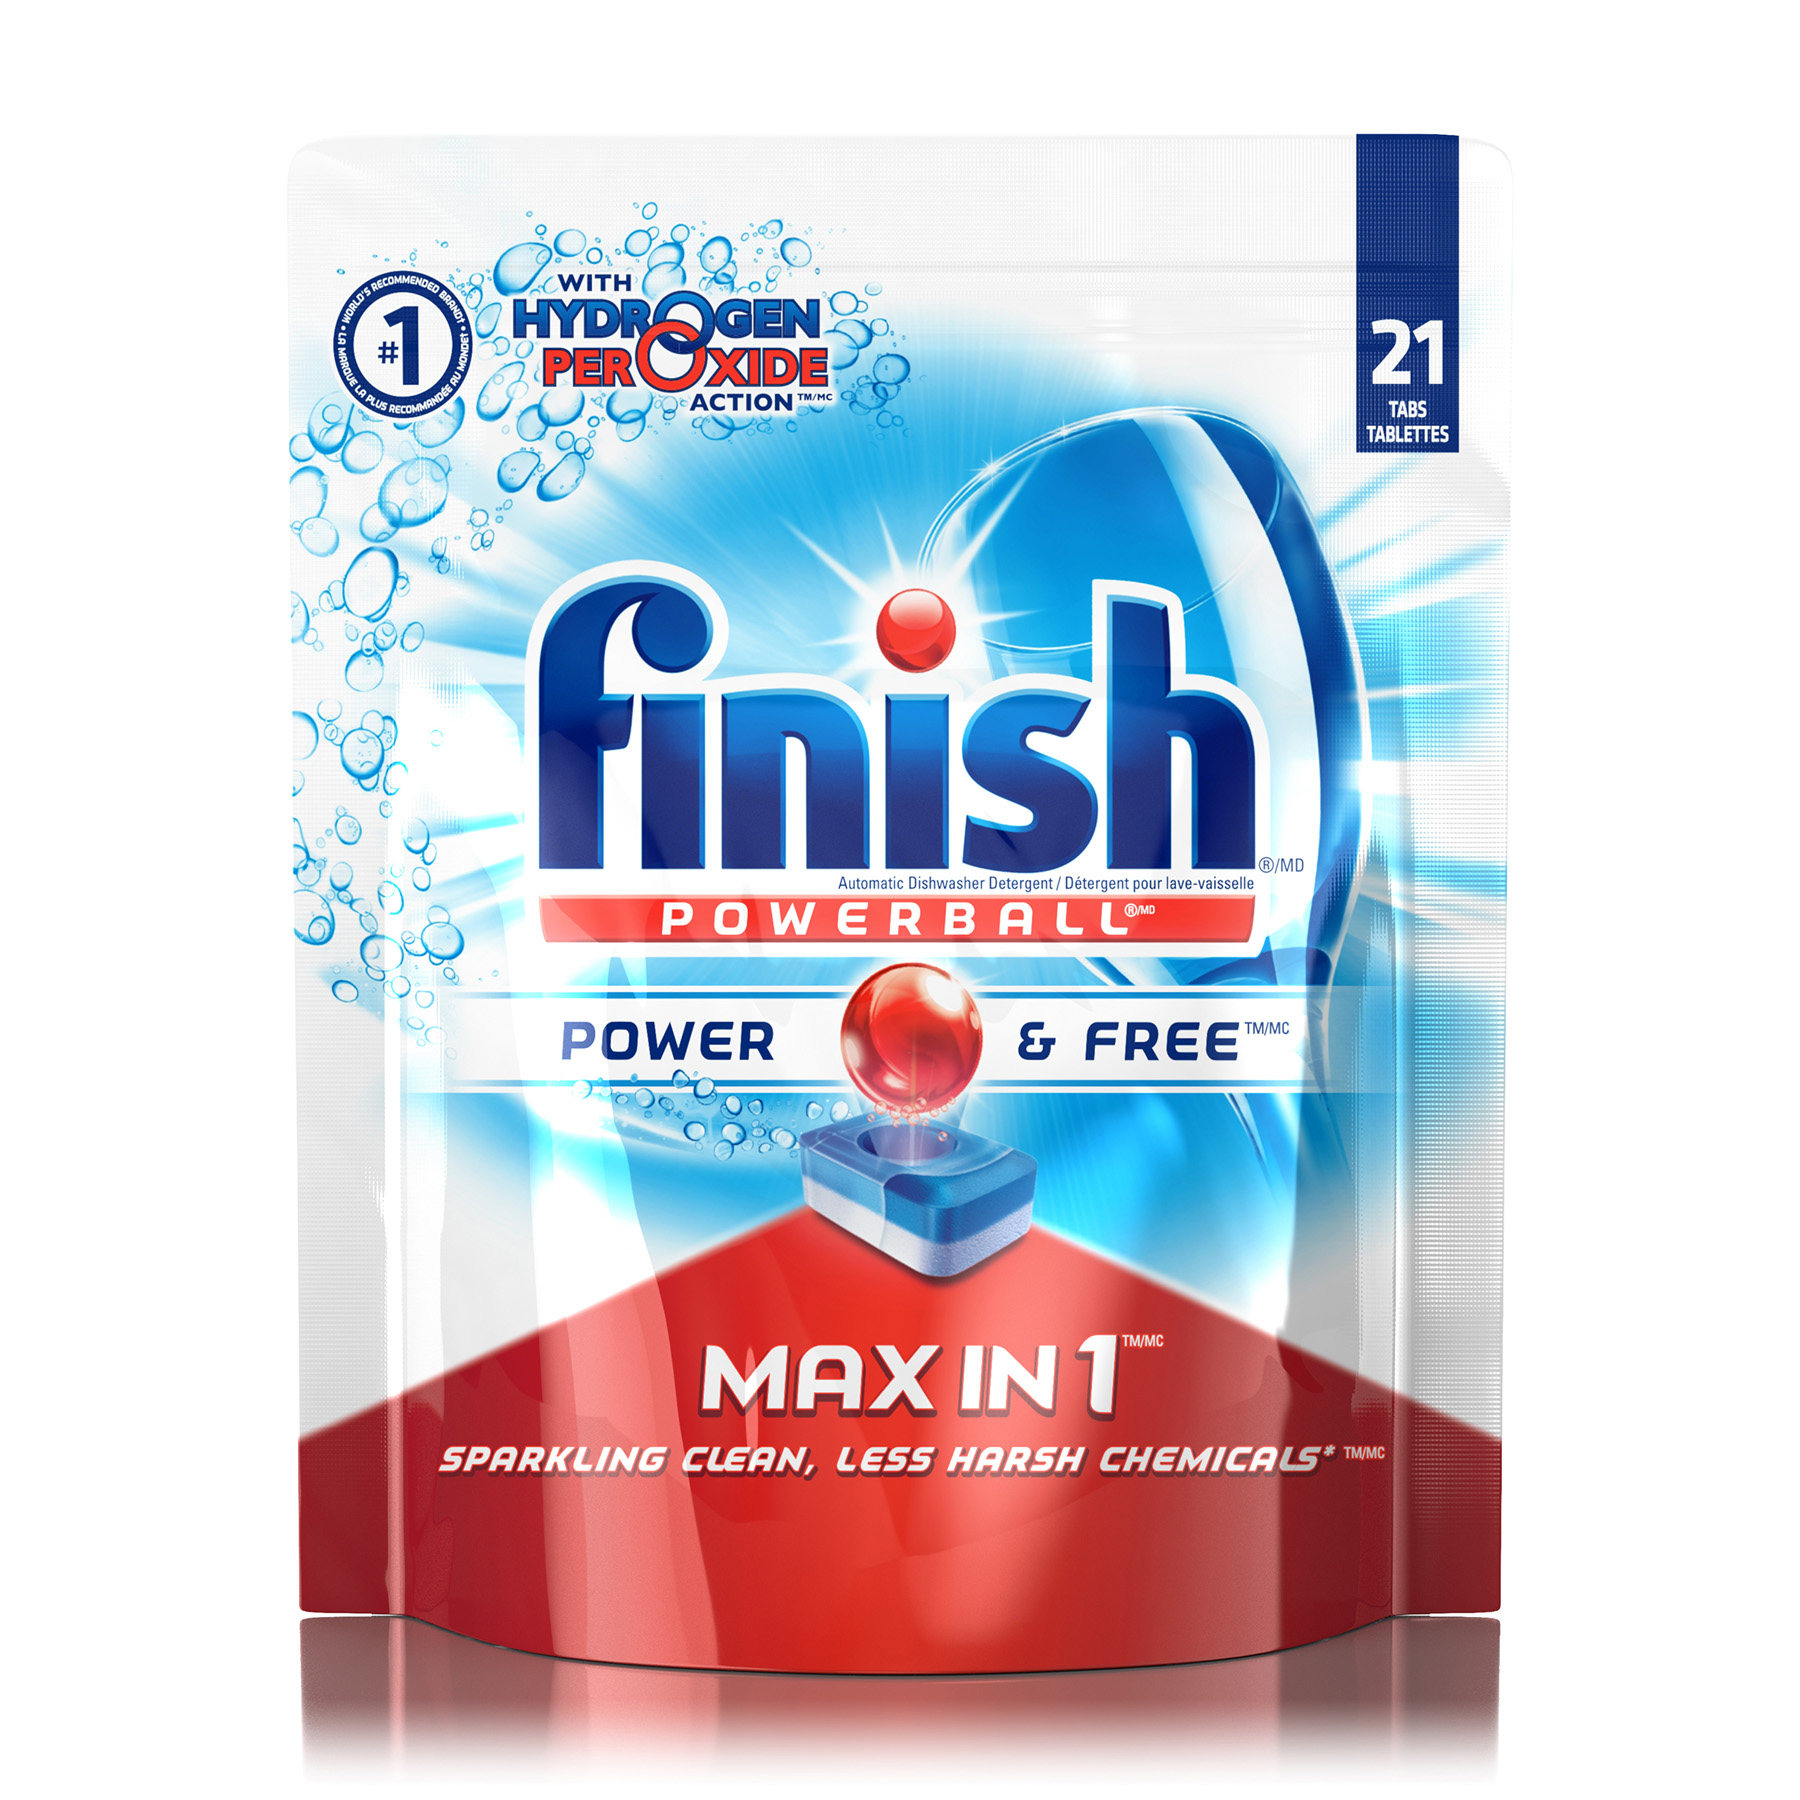 FINISH Powerball Max In 1 Power  Free Tablets Canada